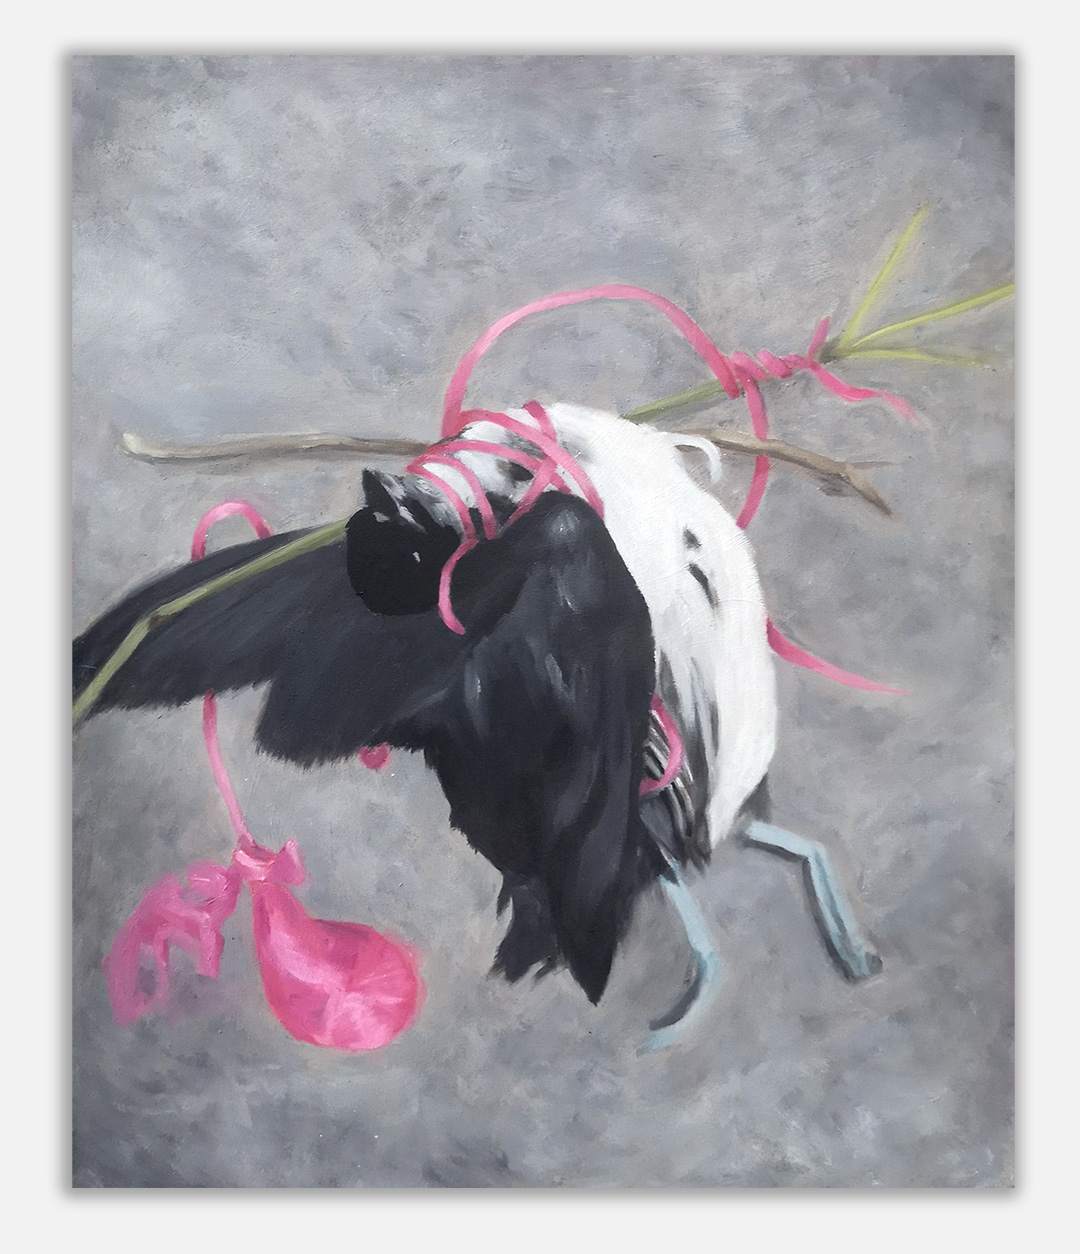 A painting of a black and white dead bird caught in the pink string of a pink balloon